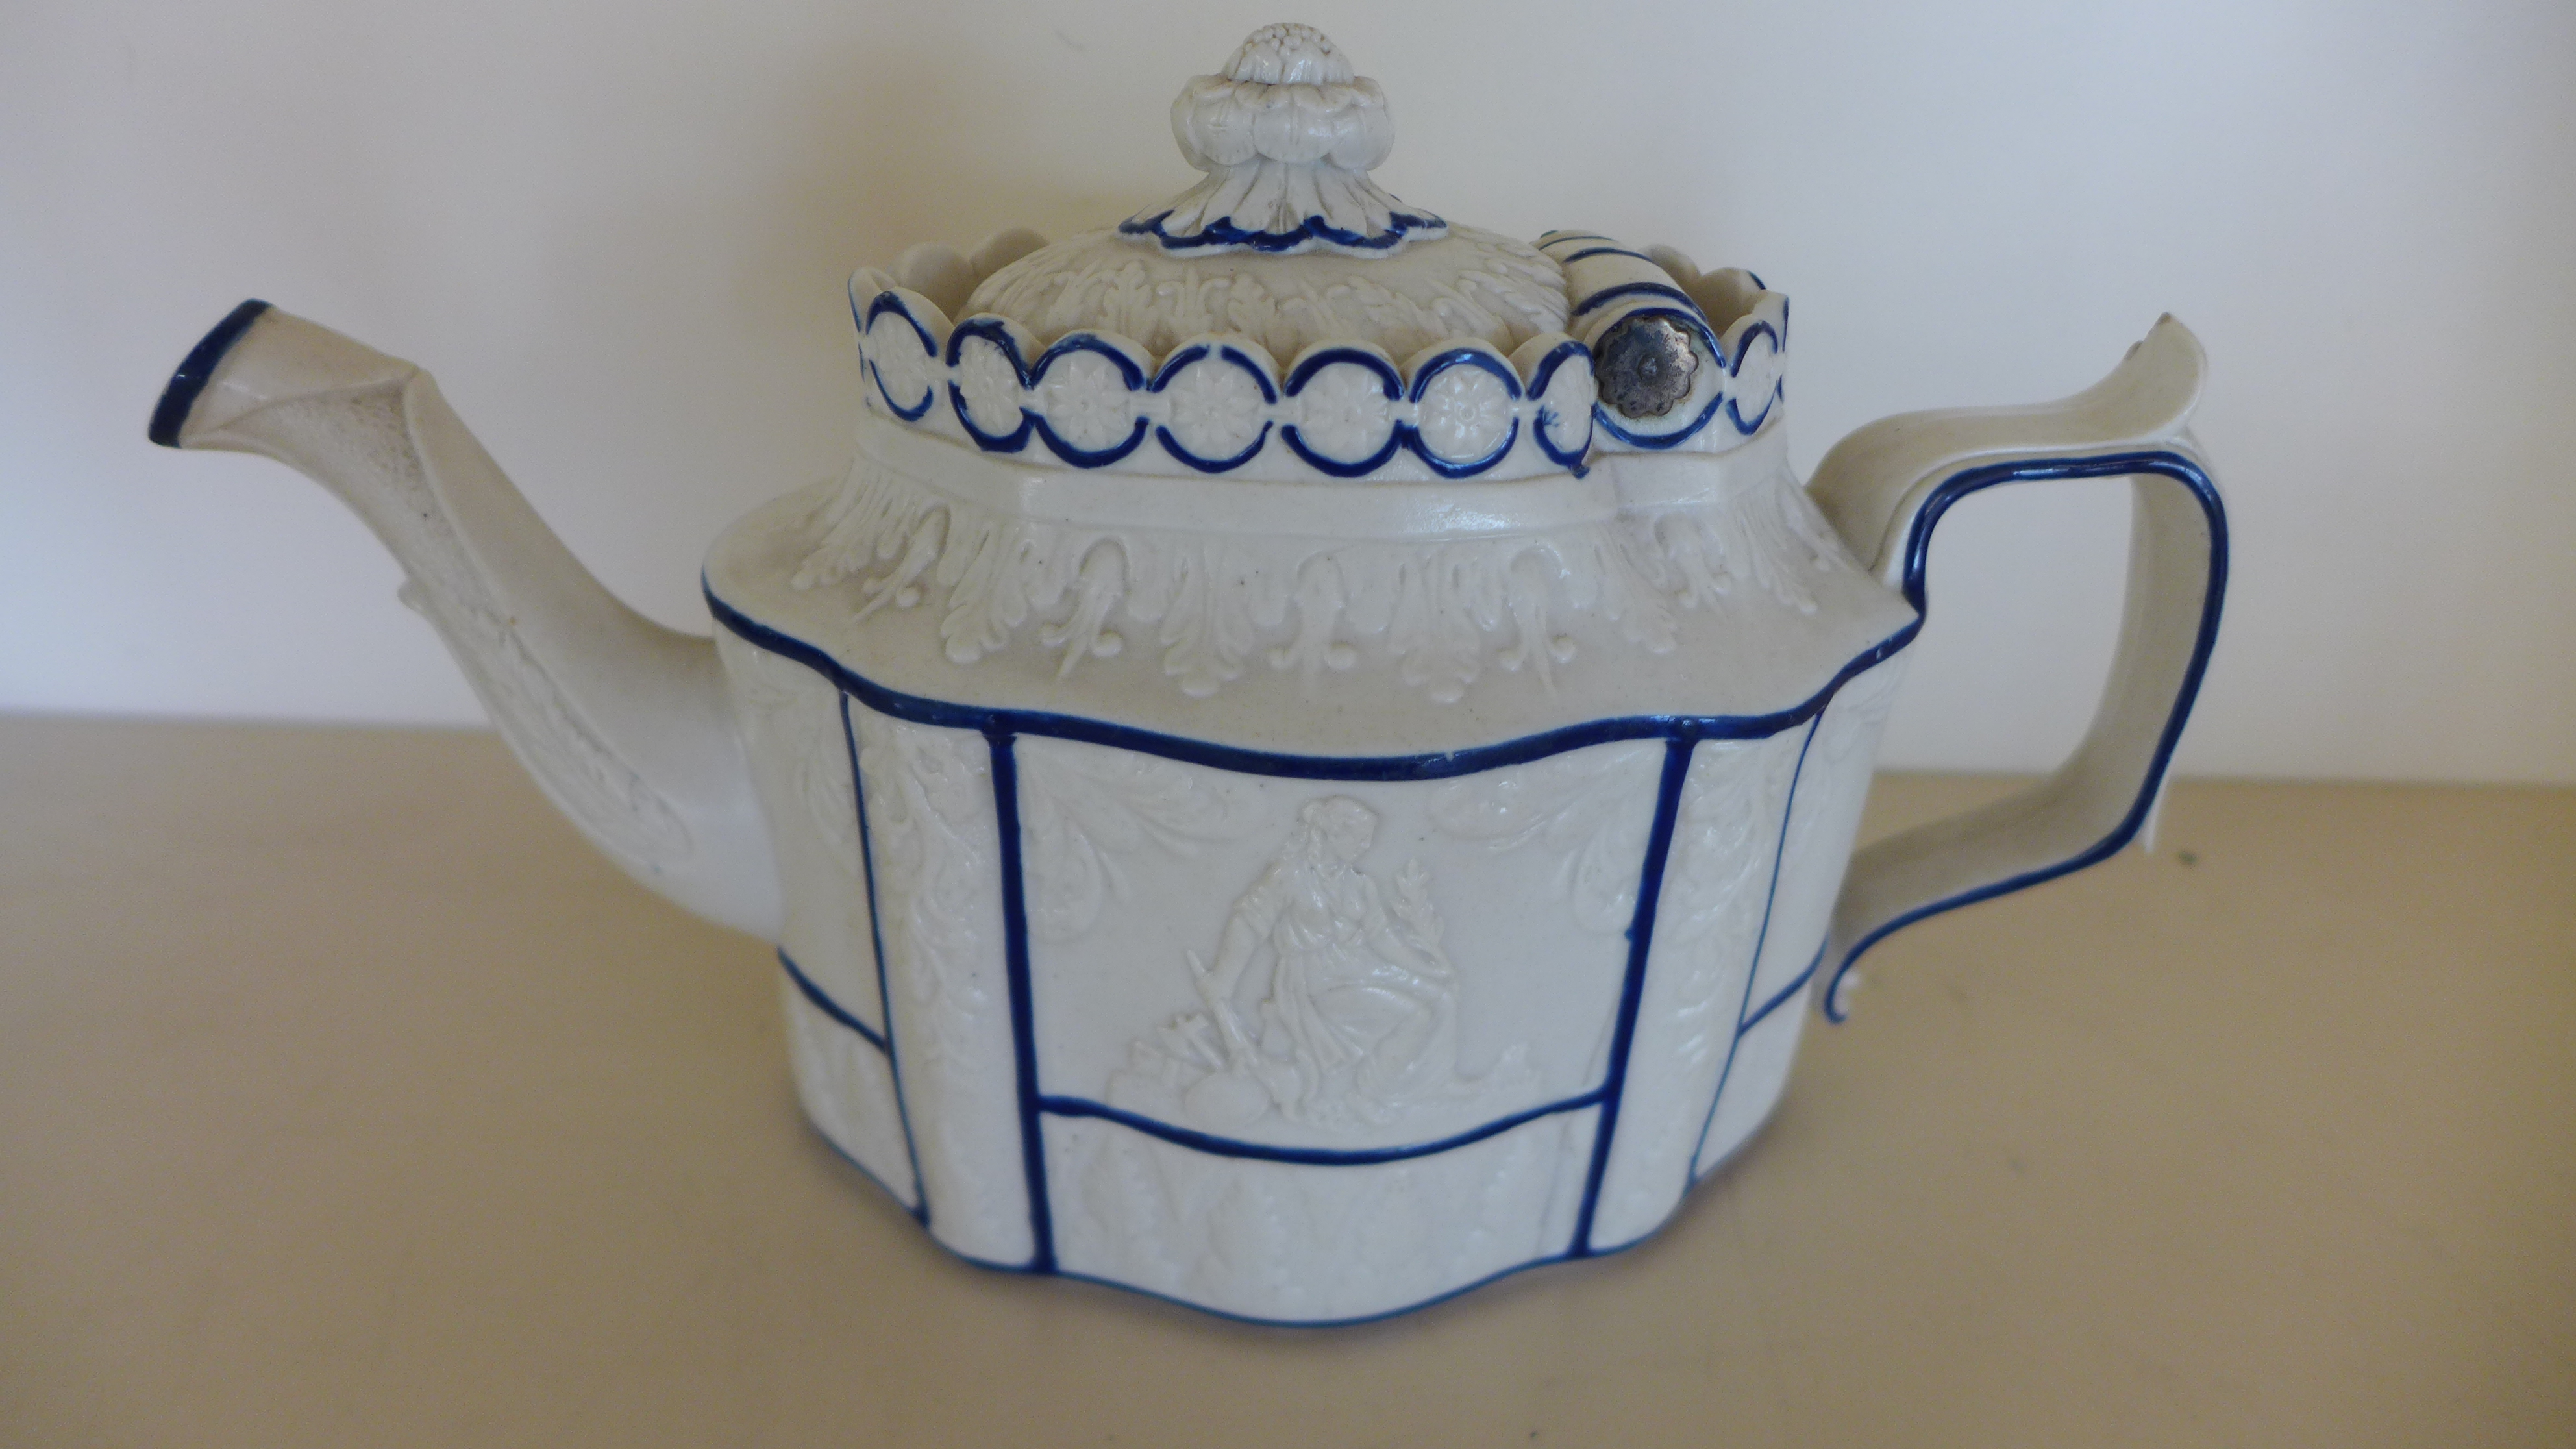 A 19th century Castleford type teapot with hinged cover and classical decoration - crack to body,